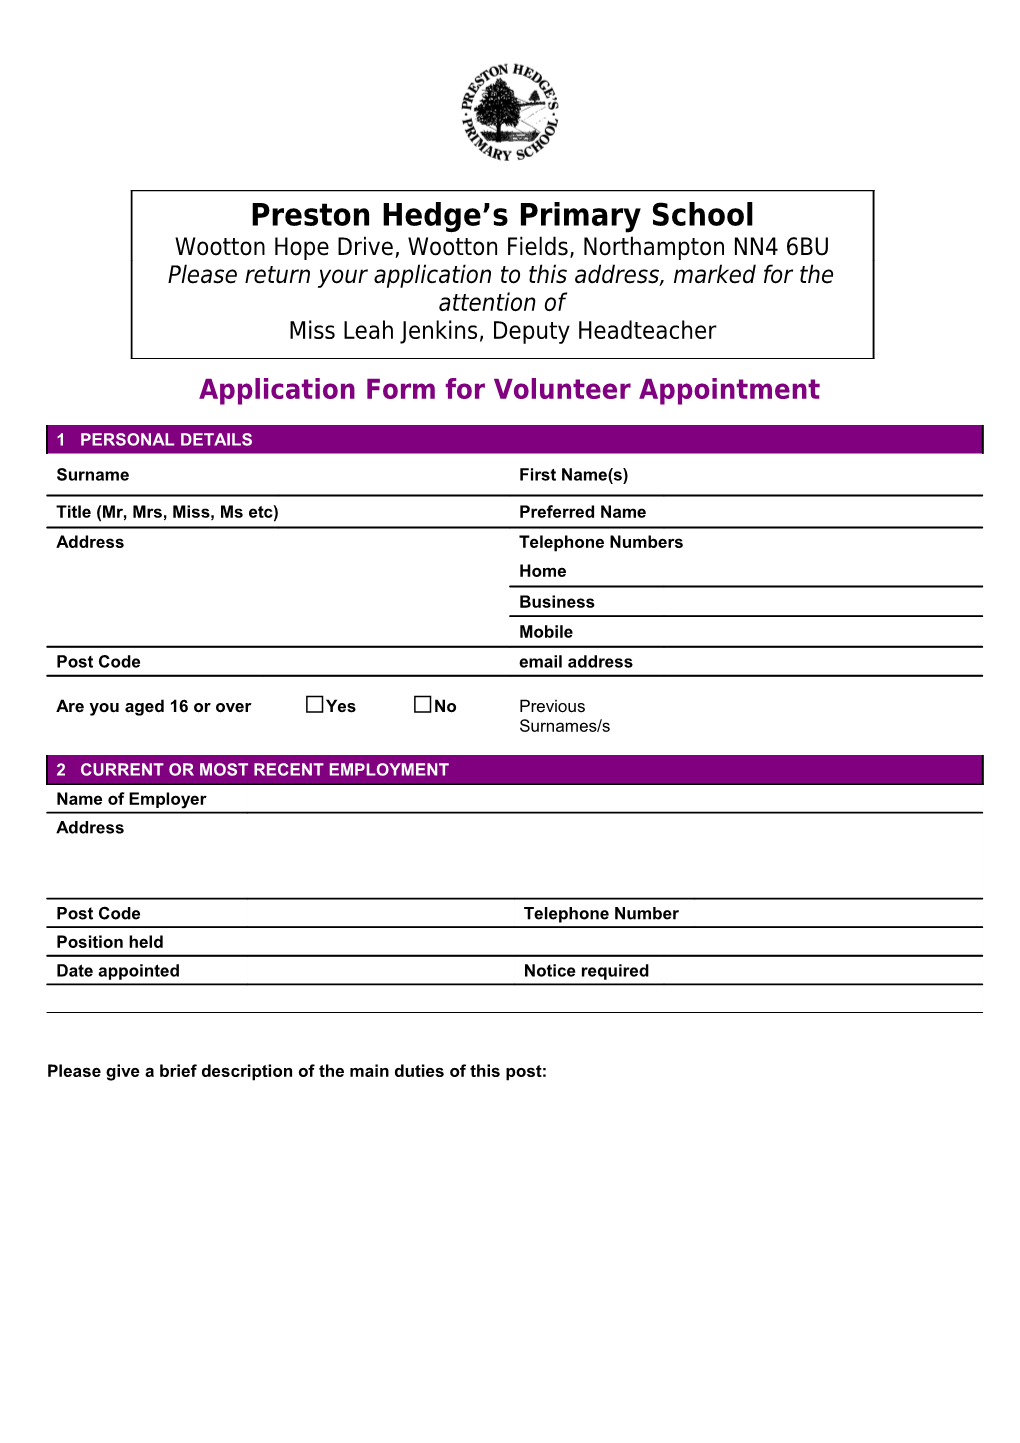 Application Form for Volunteer Appointment